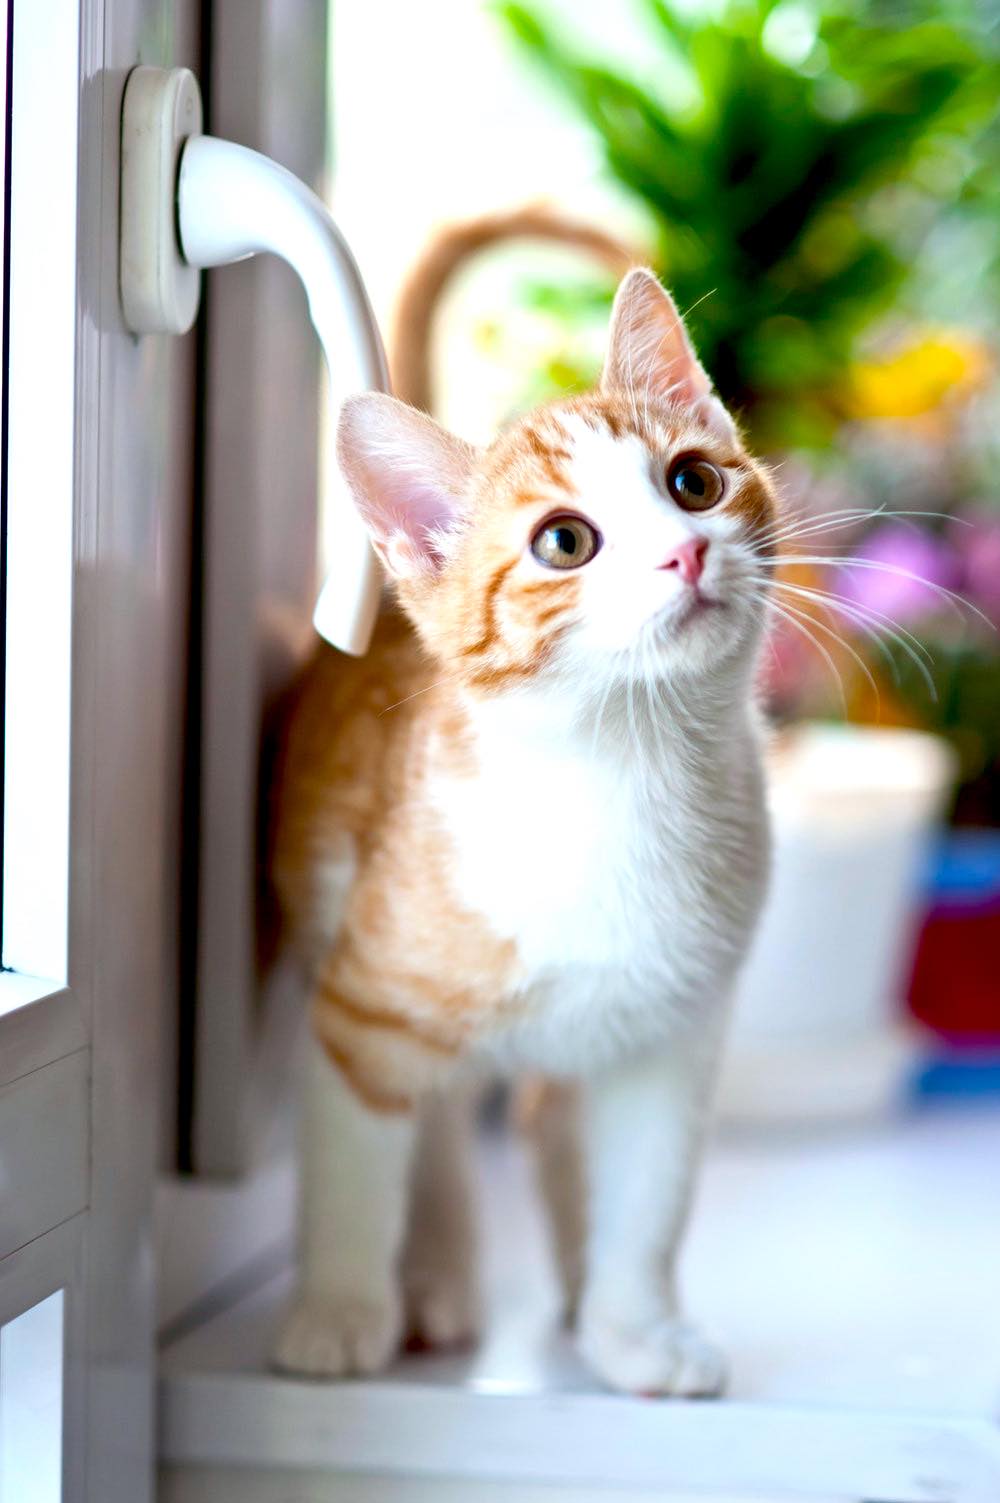 Orange Tabby Cat Near Window | Plants Poisonous To Cats You Should Avoid And How To Deal With Them